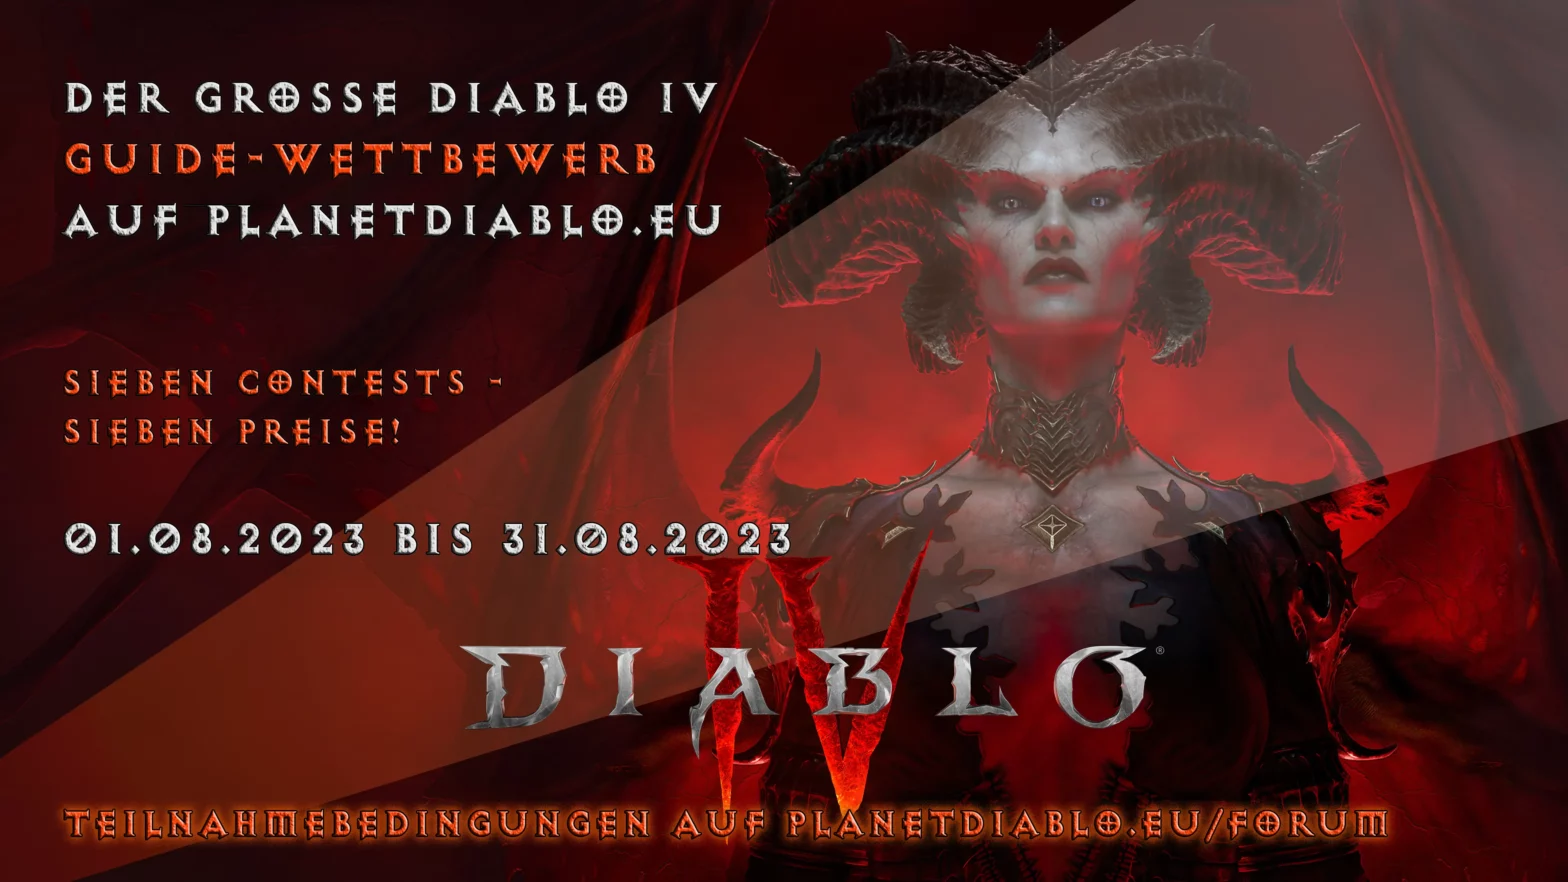 Diablo 4 Guide Contest, Guide Wettbewerb August 2023